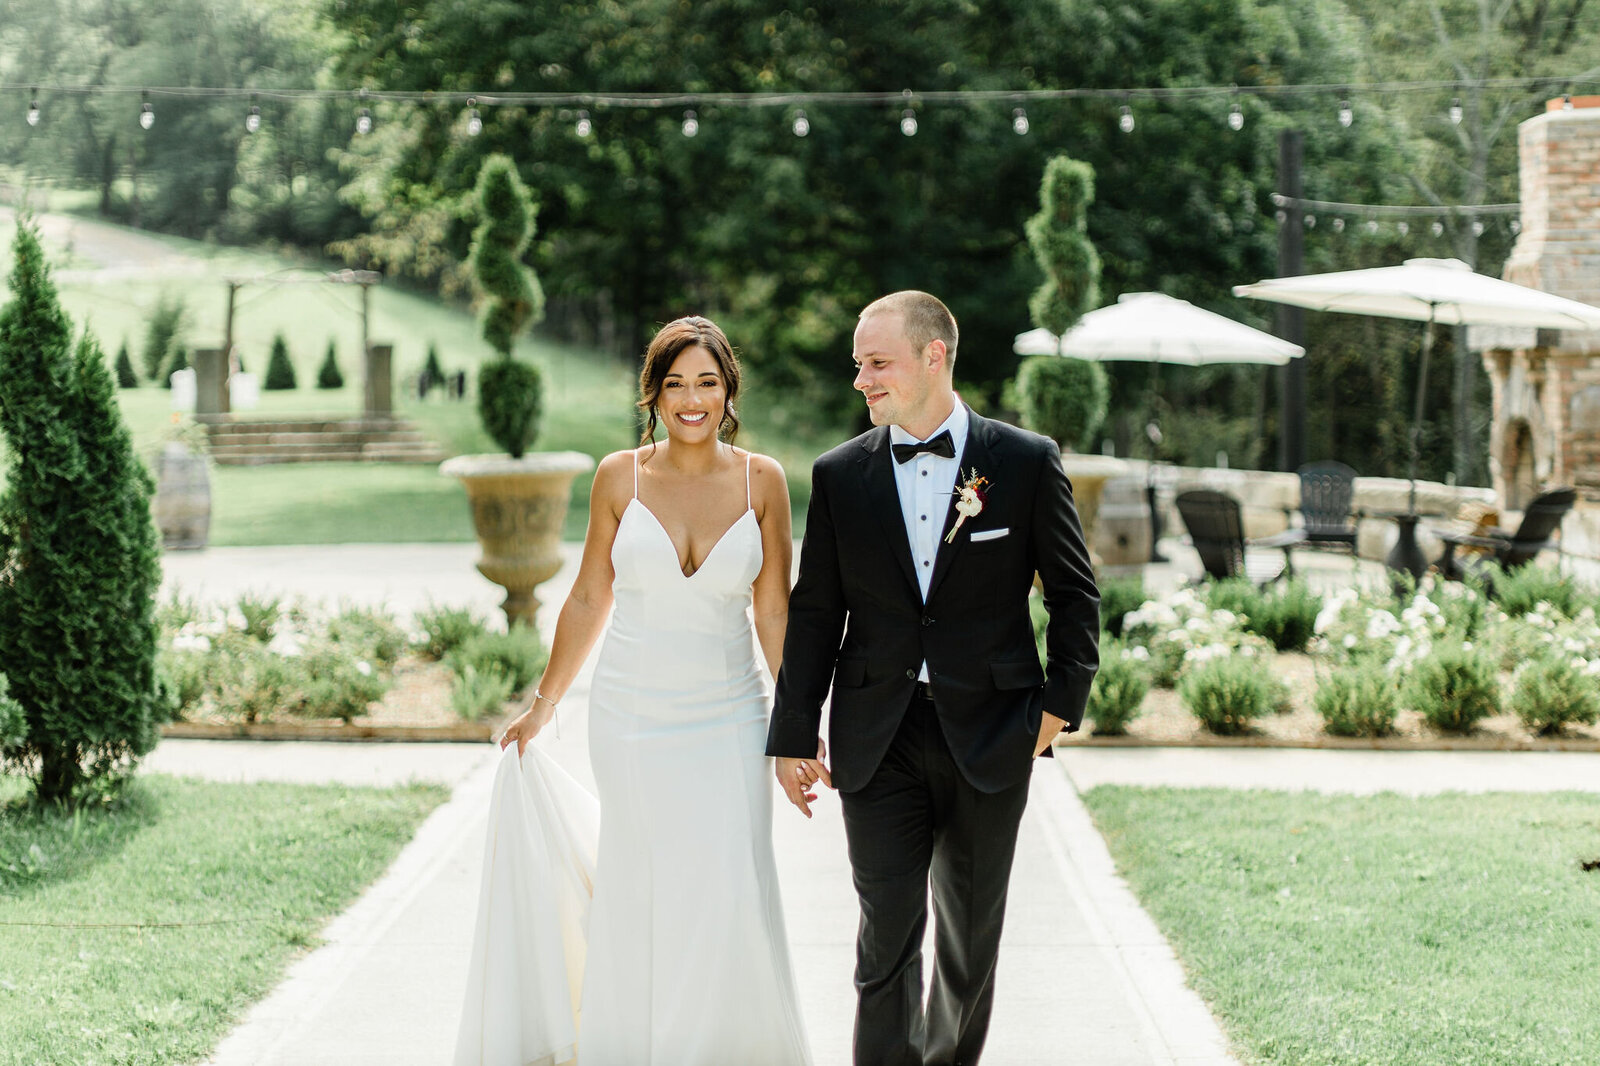 Wedding Day Walking Photo | Cleveland OH | The Axtells Photo and Film